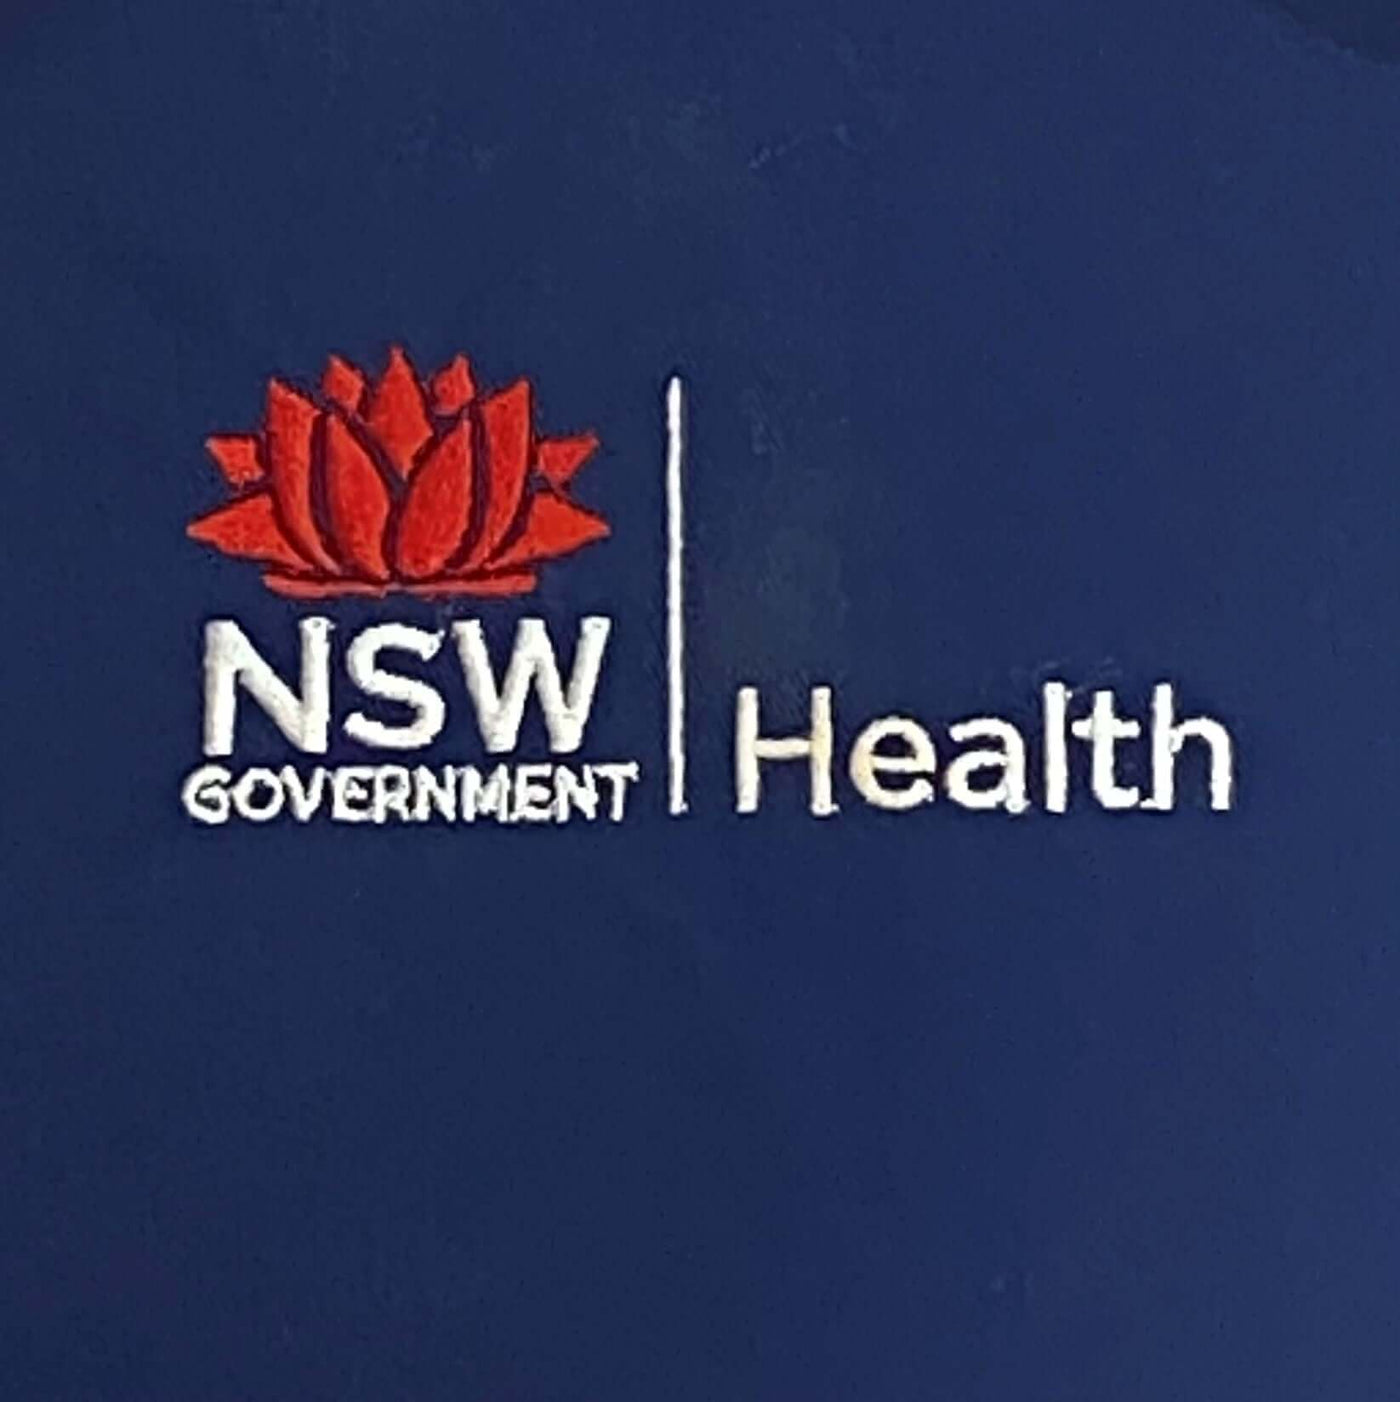 Embroidery Stock Logos - NSW Government Health